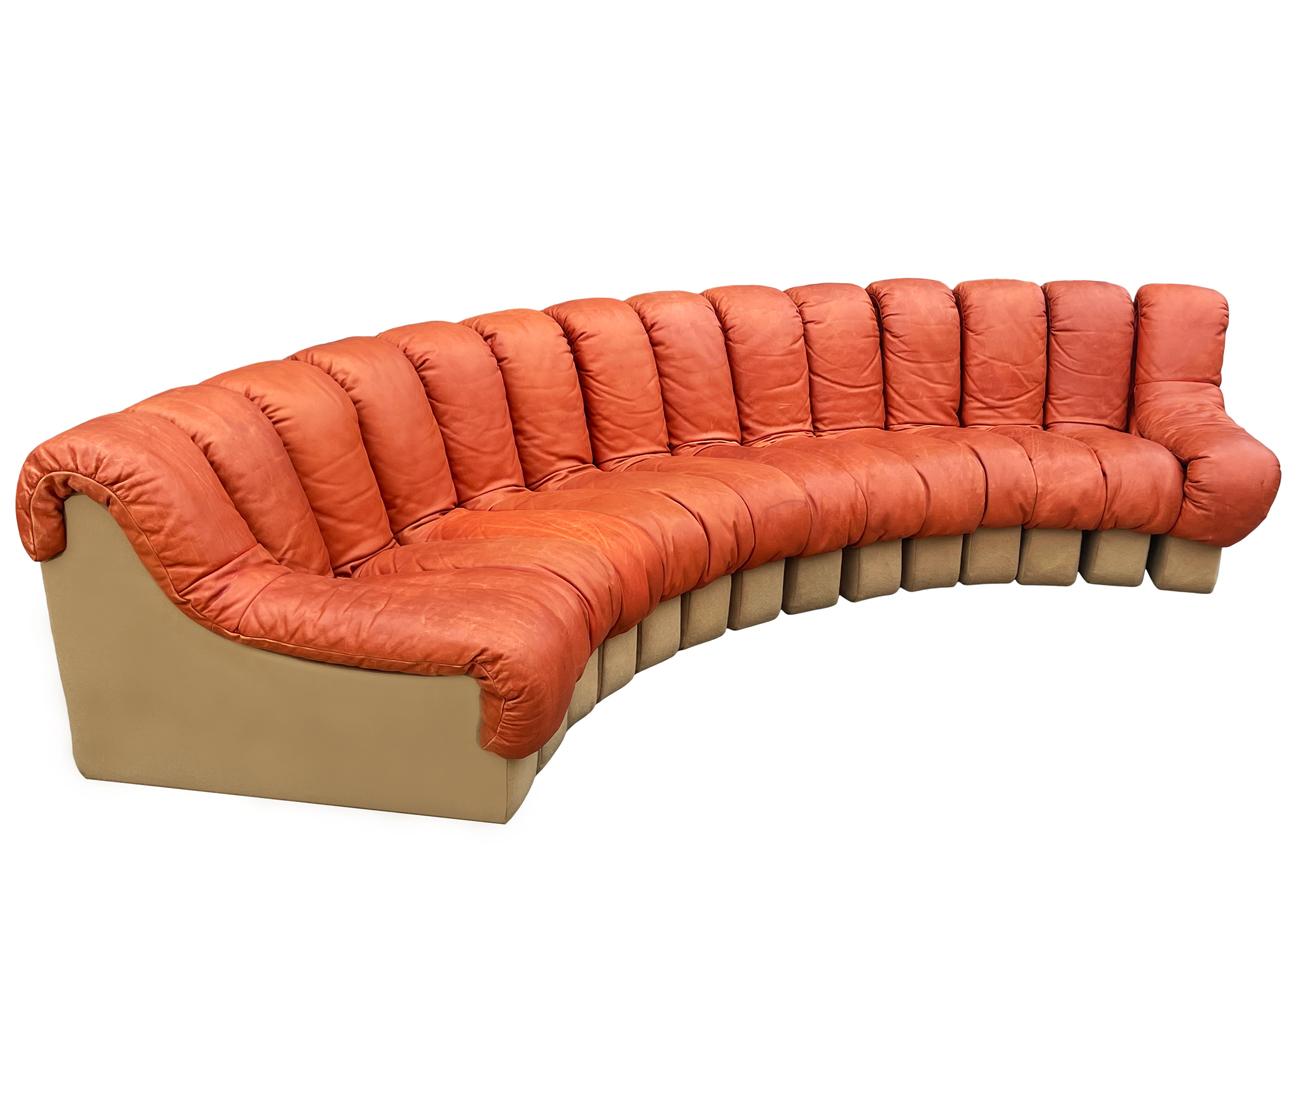 Mid-Century Modern De Sede 600 Nonstop Curved Leather Sectional Sofa in Cognac 7